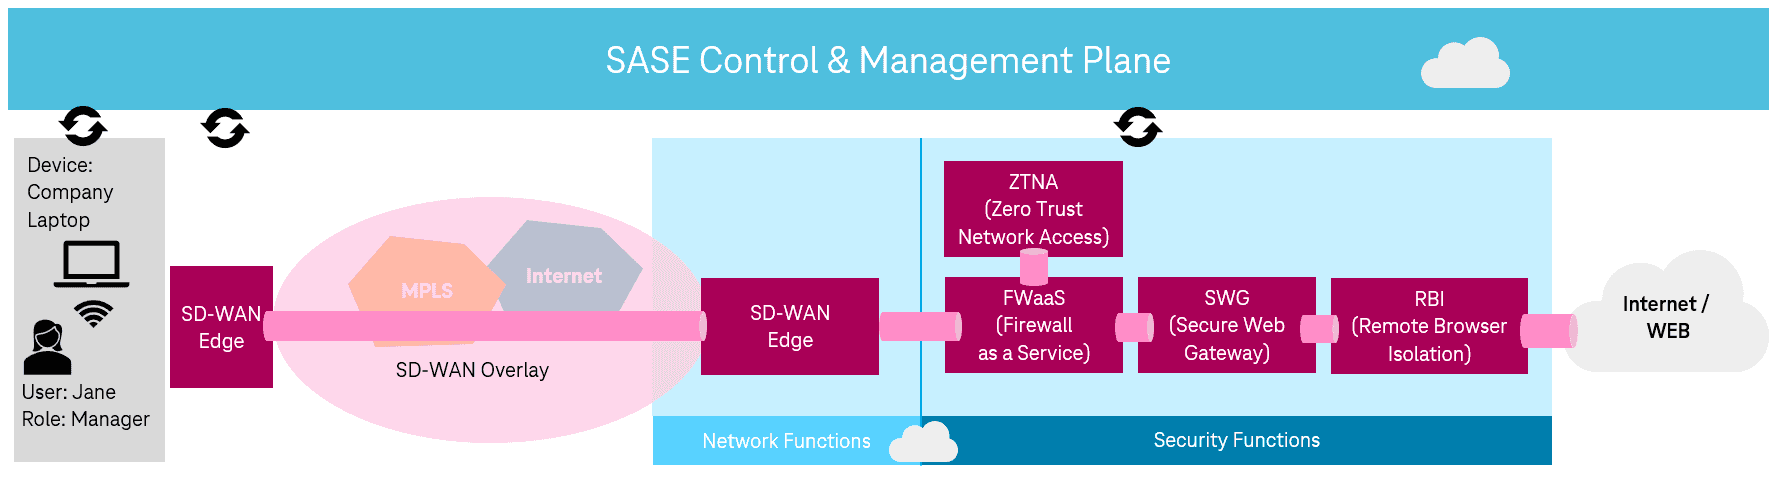 Access to the Internet from the corporate network with SASE approach